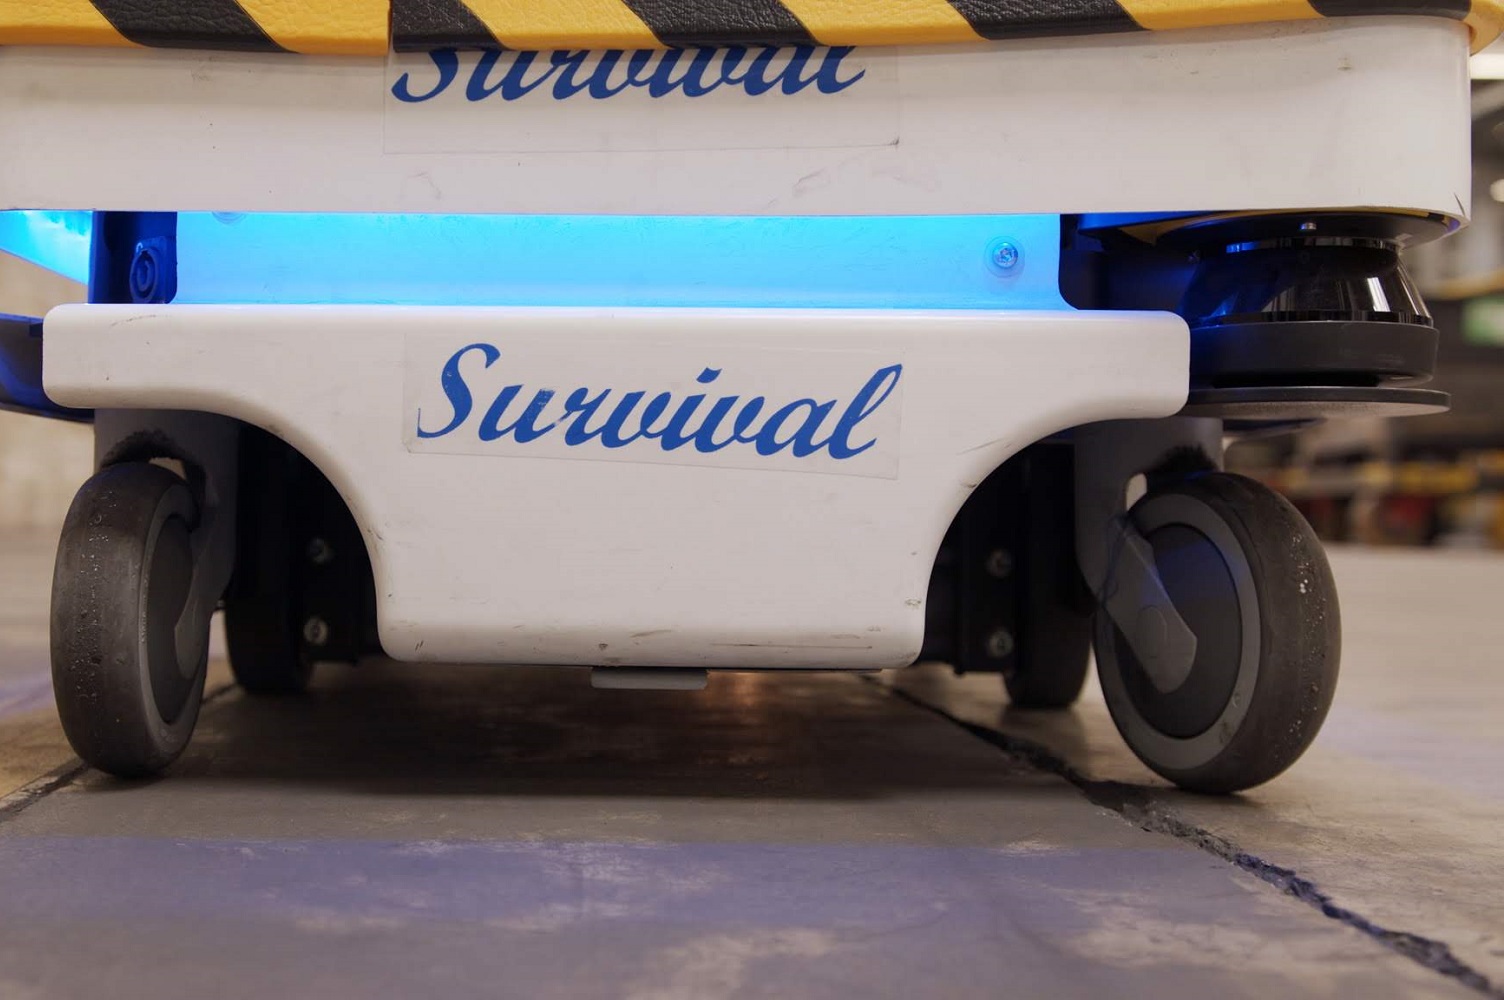 Ford Survival robot